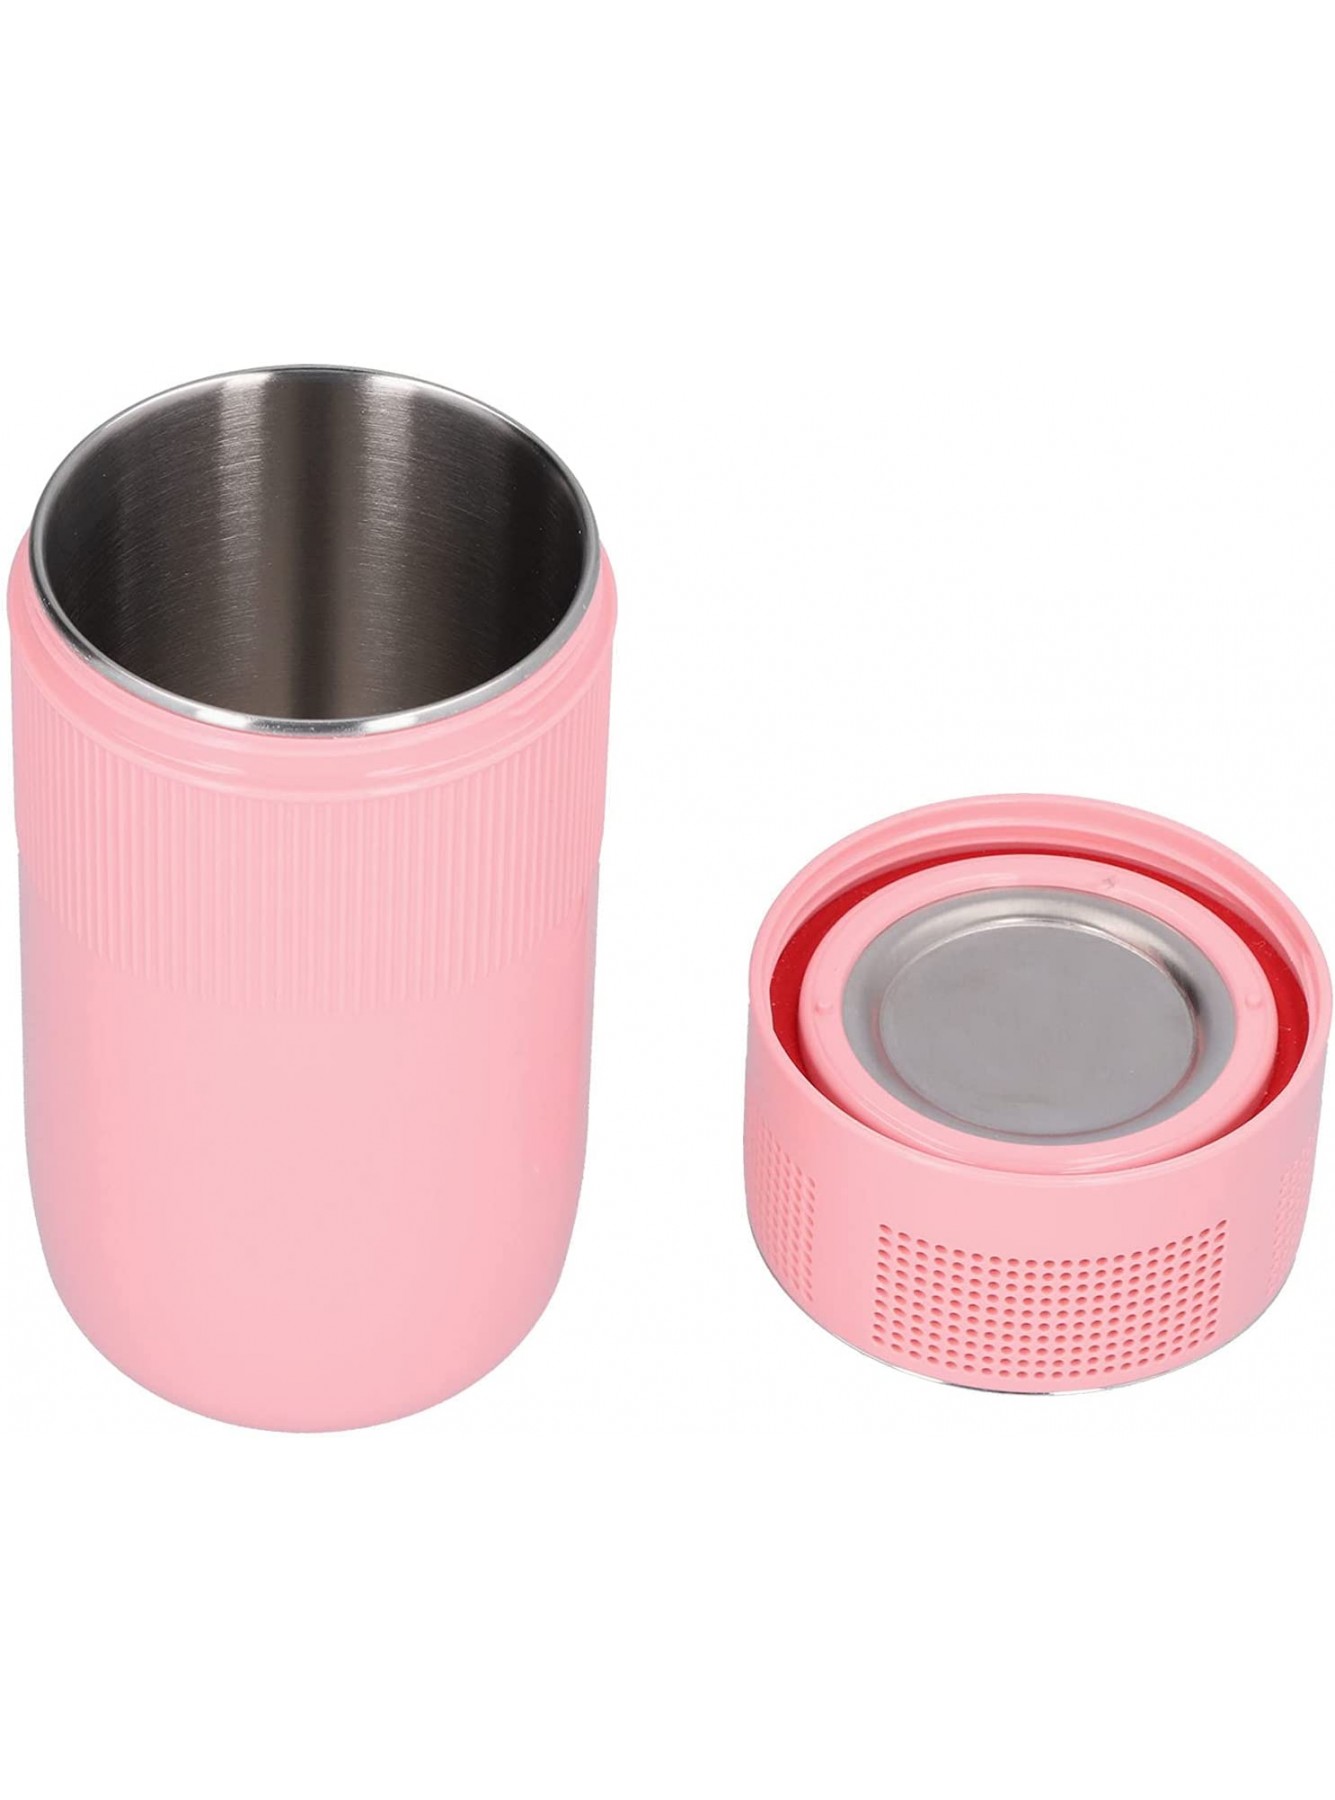 Cooler Can Cooling Cup Automatic Shutdown Low Energy Refrigeration Cup 380ml Simple in Shape for Kitchen for Household B09NKKMDPG